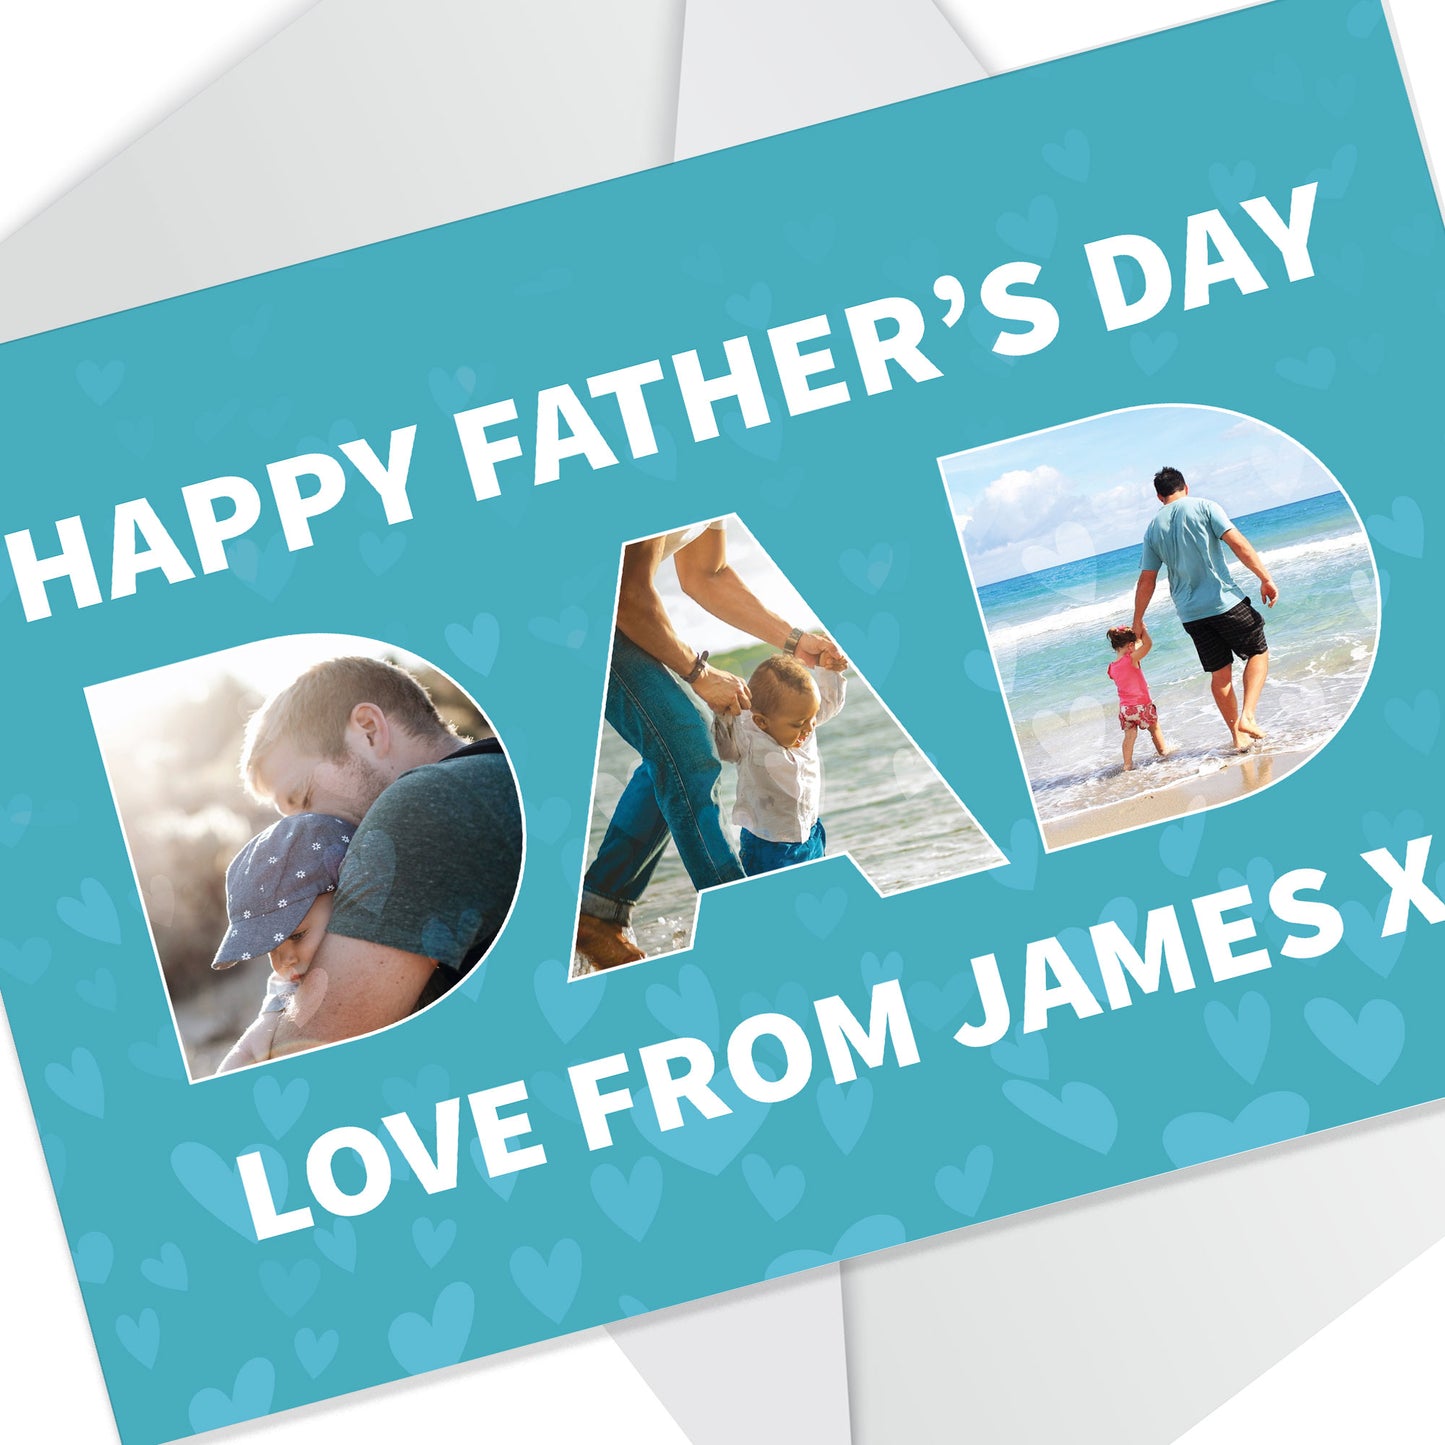 Personalised Fathers Day Card For Dad With Photos DAD CARD